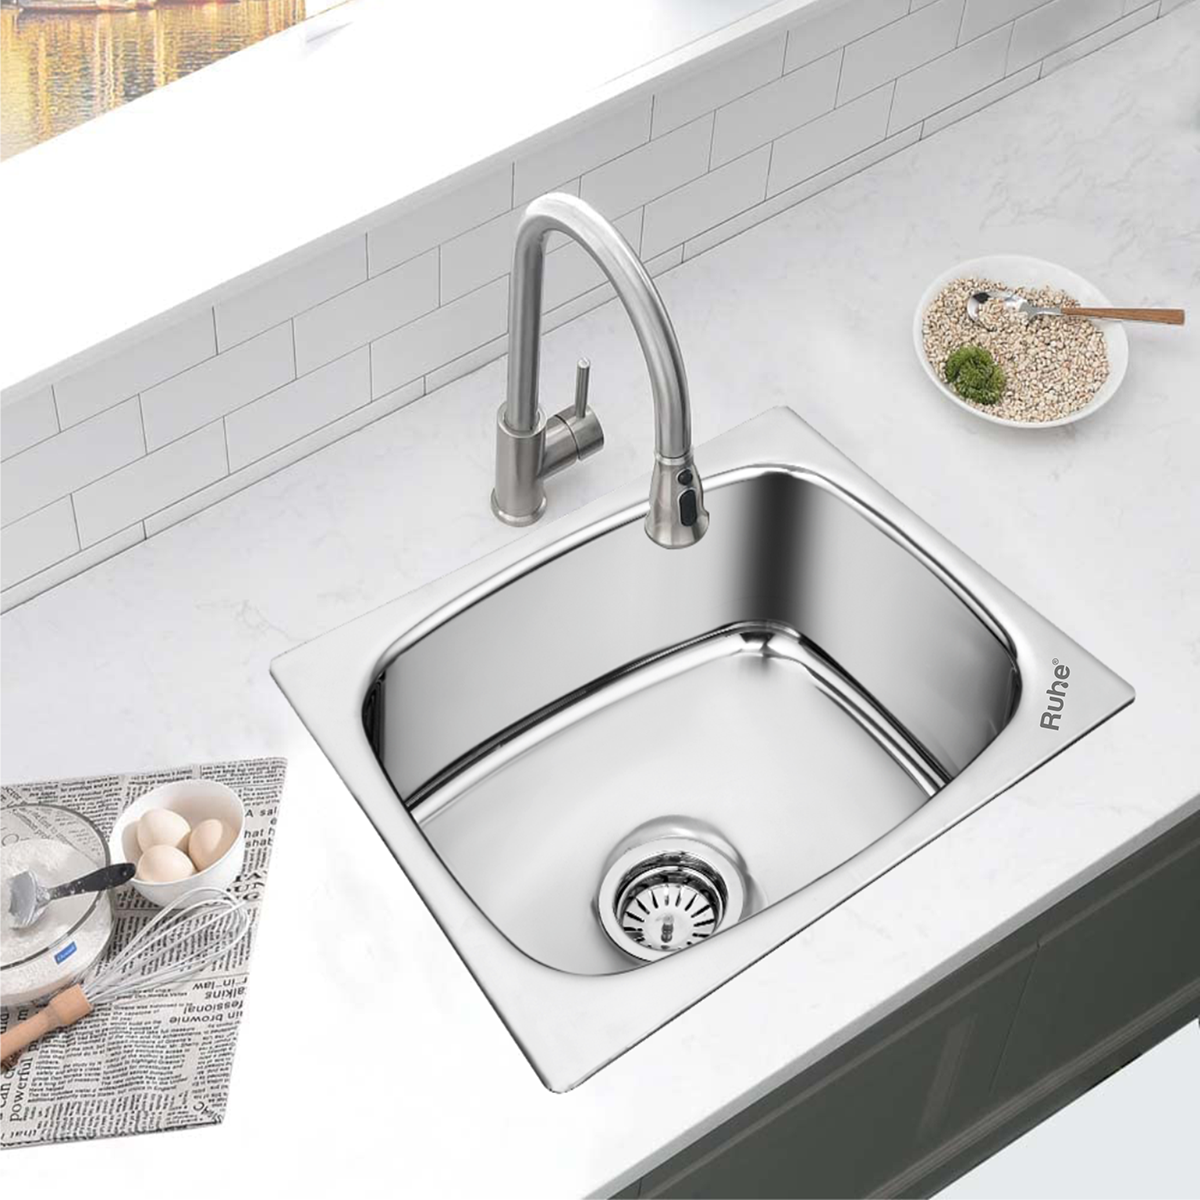 Oval Single Bowl (20 x 17 x 8 inches) Kitchen Sink installed